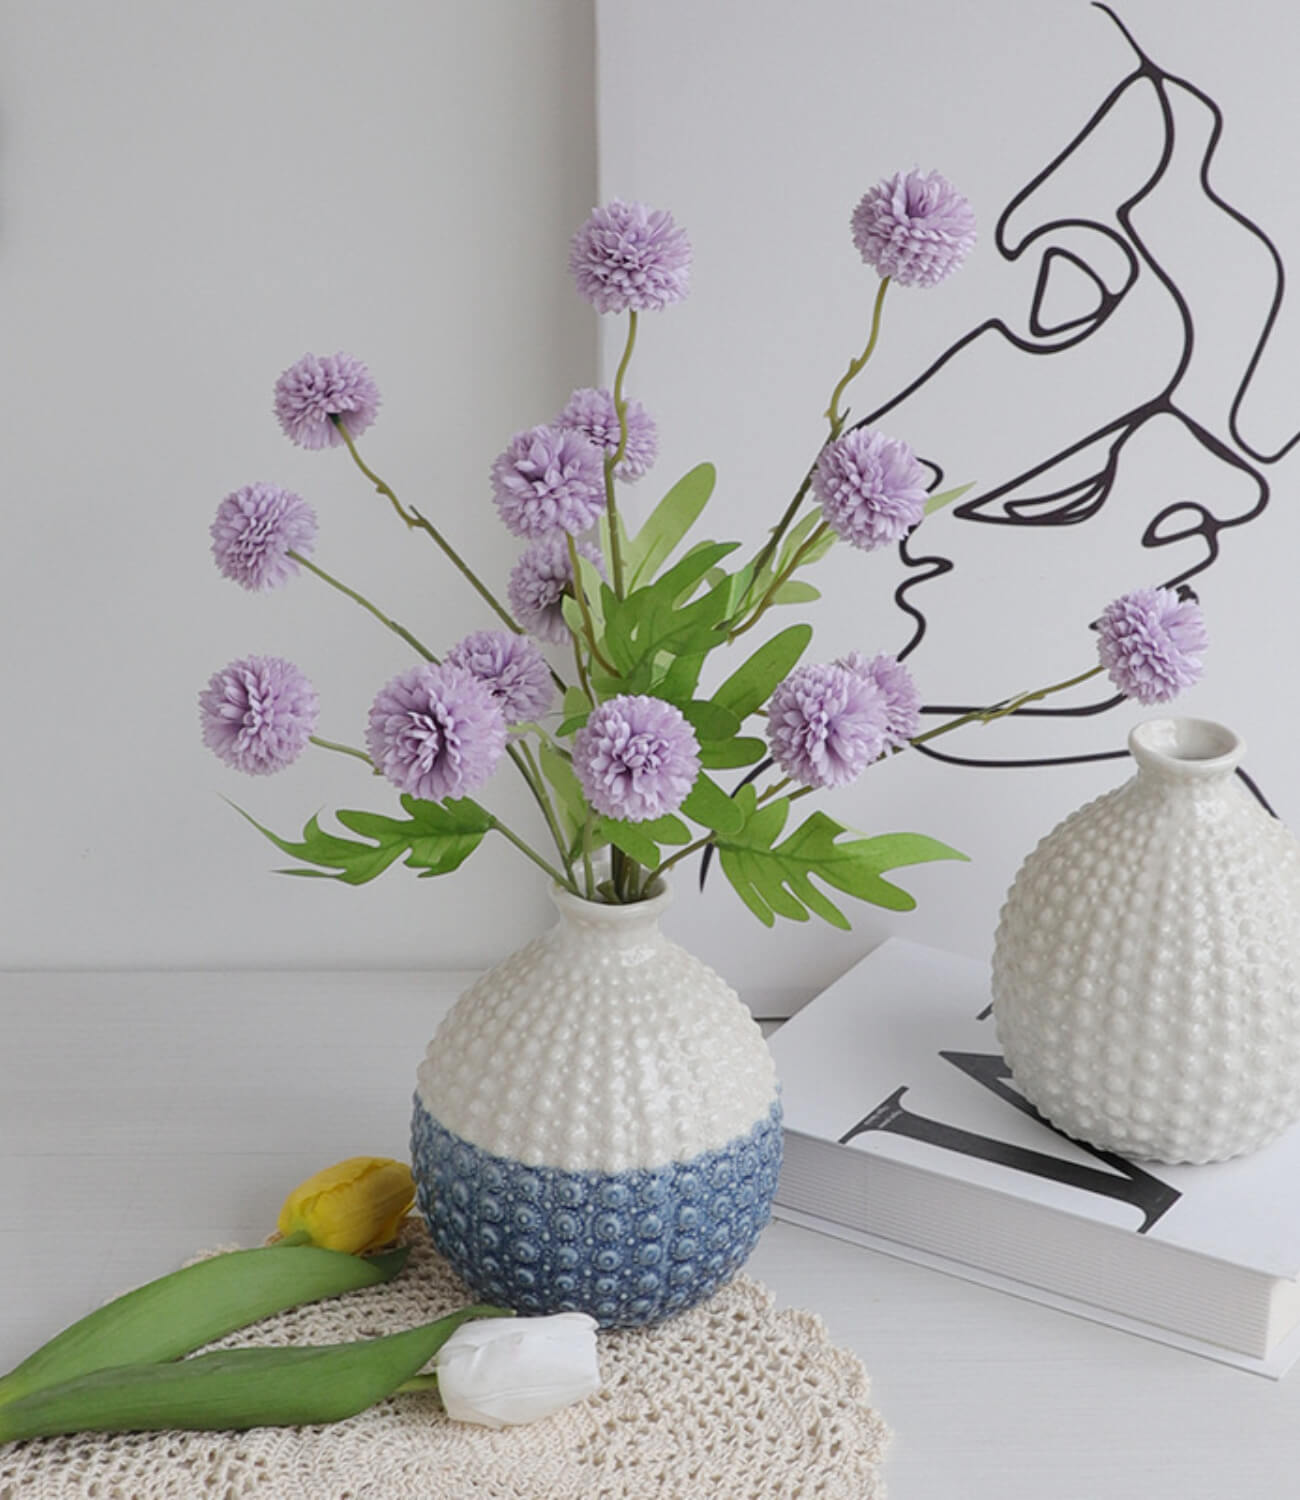 Petals unfurl in the artistic ceramic vase, like a beautiful melody, filling the home with a tranquil atmosphere.